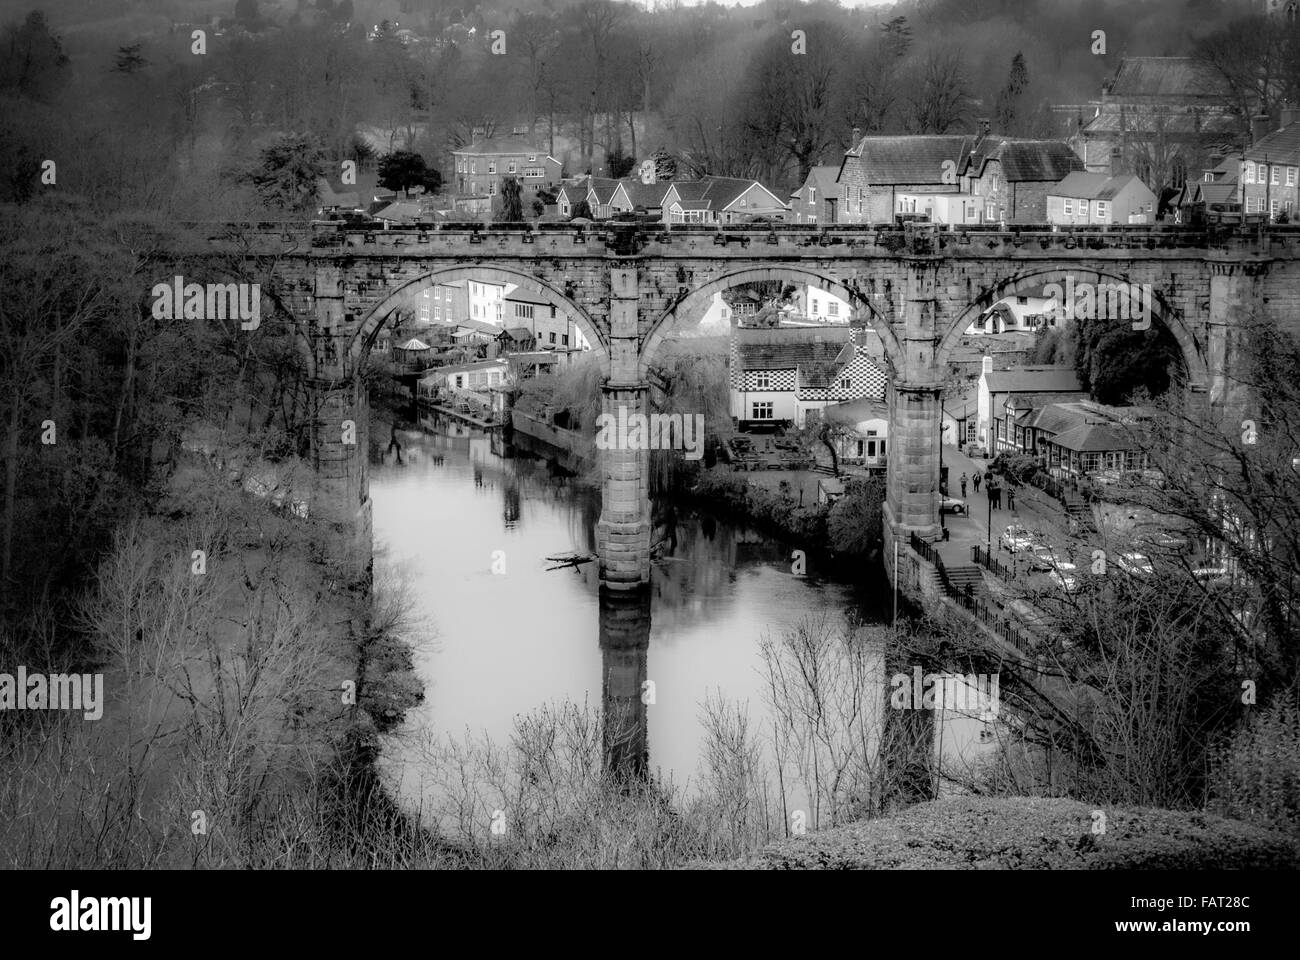 Stone viaduct over the River Nidd in Knaresborough, North Yorkshire. Stock Photo